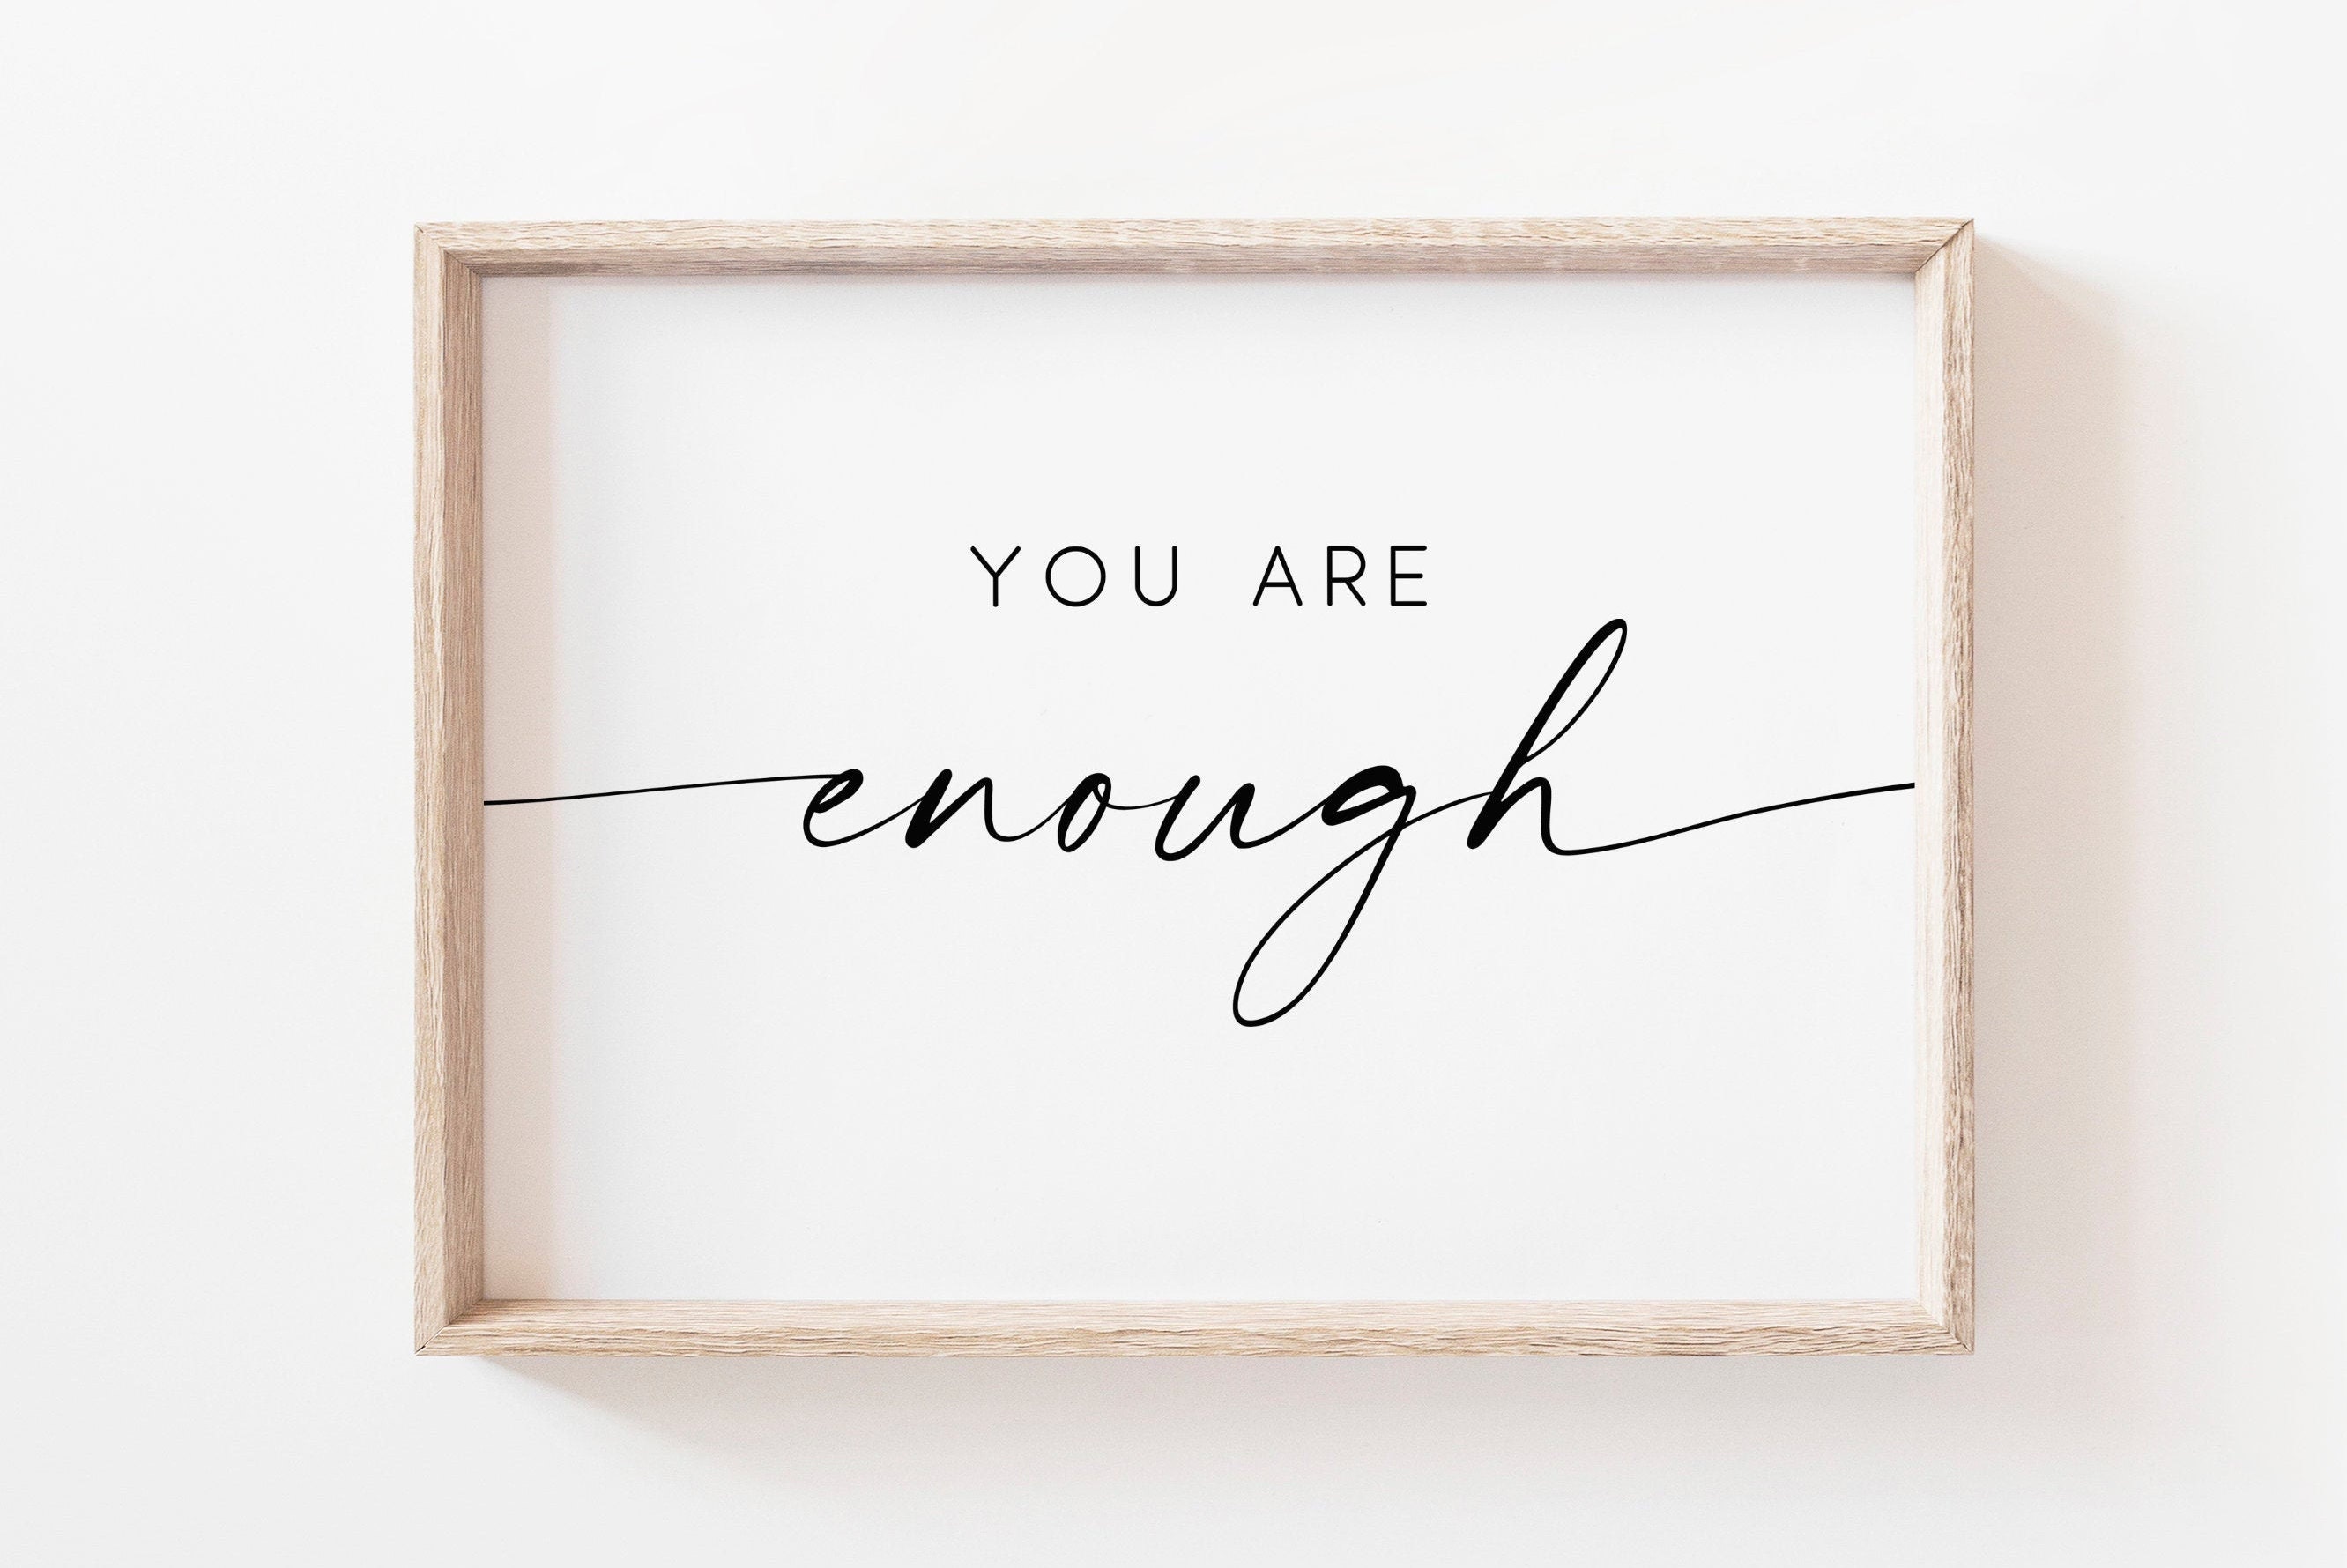 You Are Enough! - Clumsy Crafter